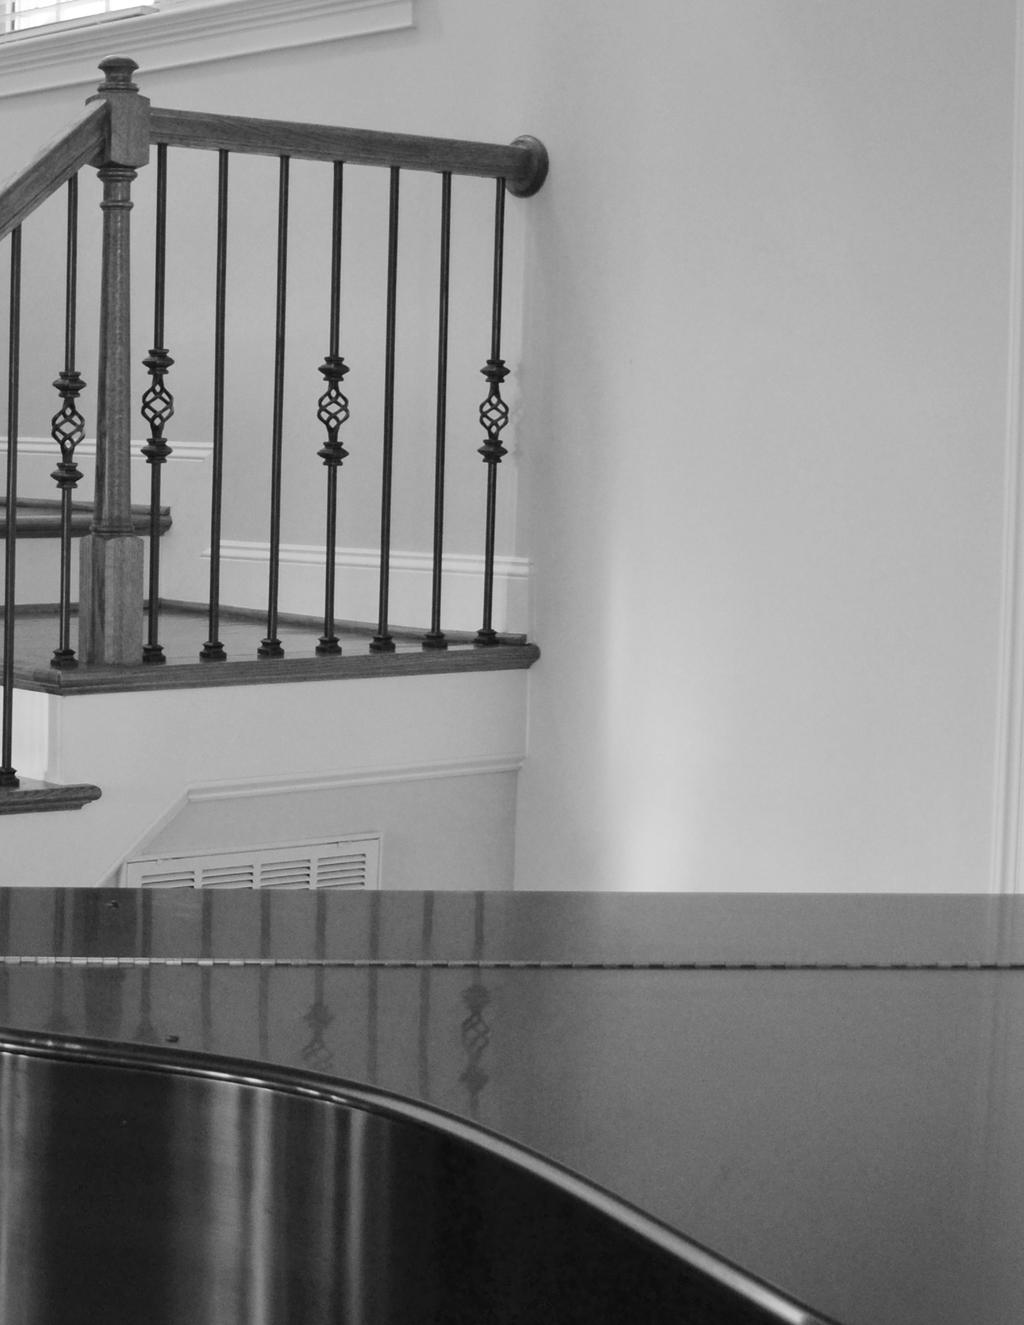 llection Coffman Stair Par ts offers a vast collection of qualit y iron balusters in both Hollow and Solid.